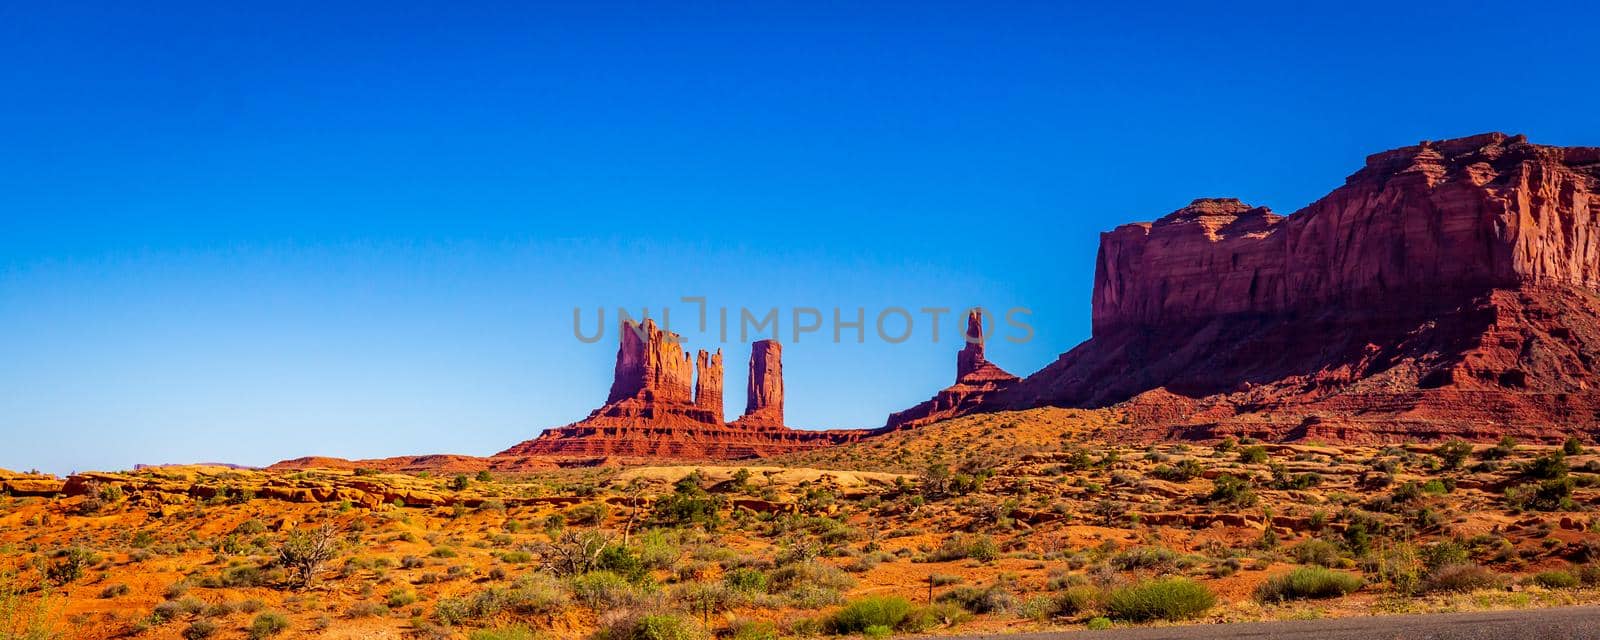 Monument valley in late afternoon by gepeng